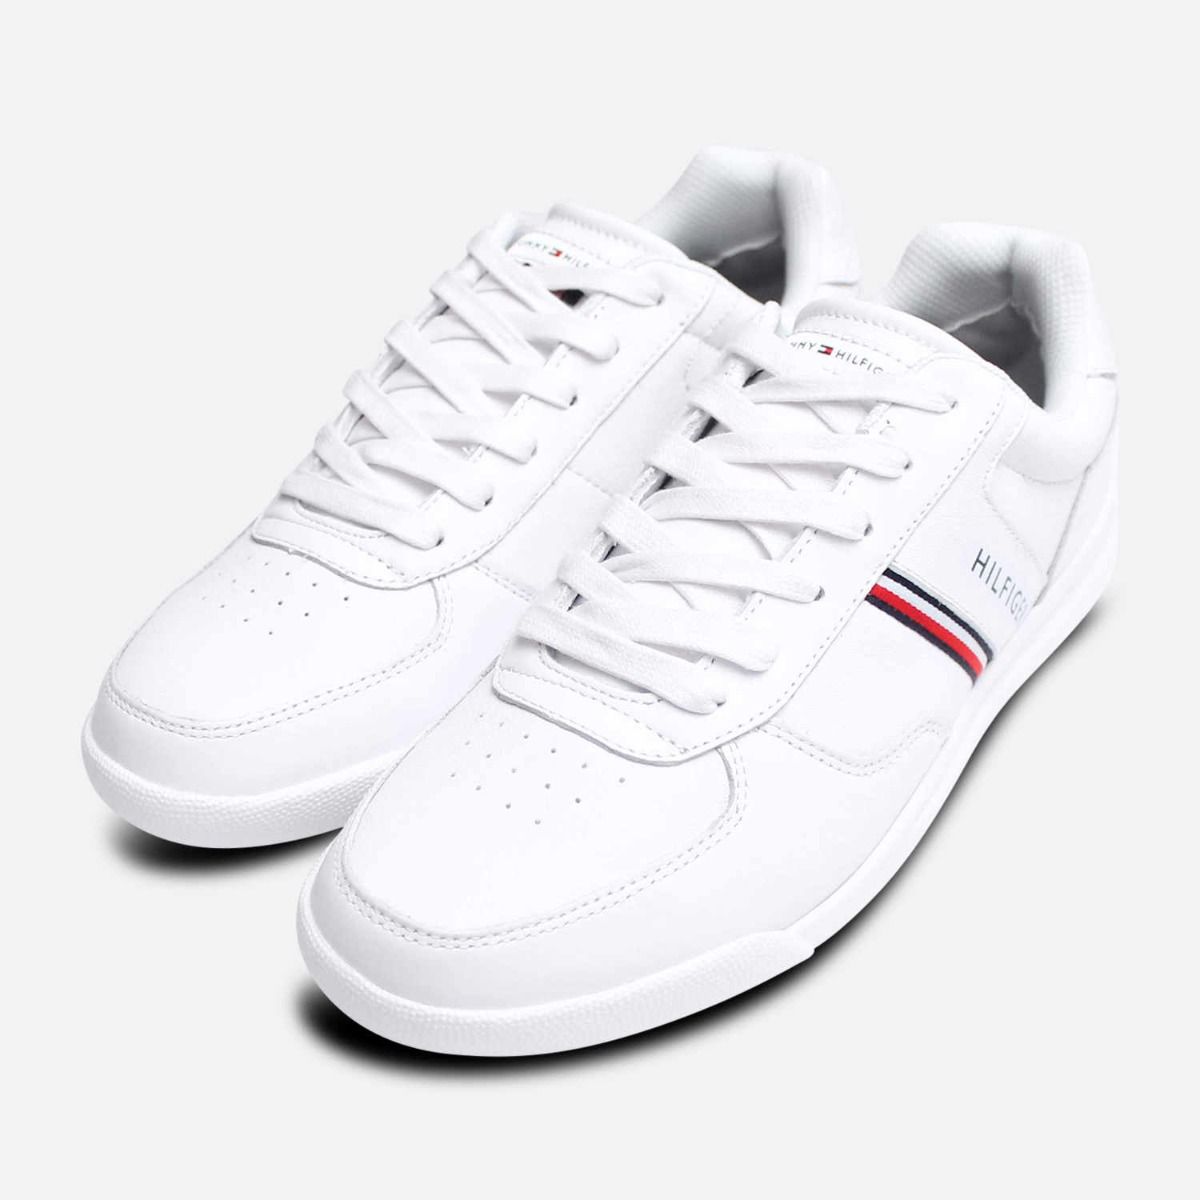 Hilfiger Retro All White Leather Mens Training Shoes